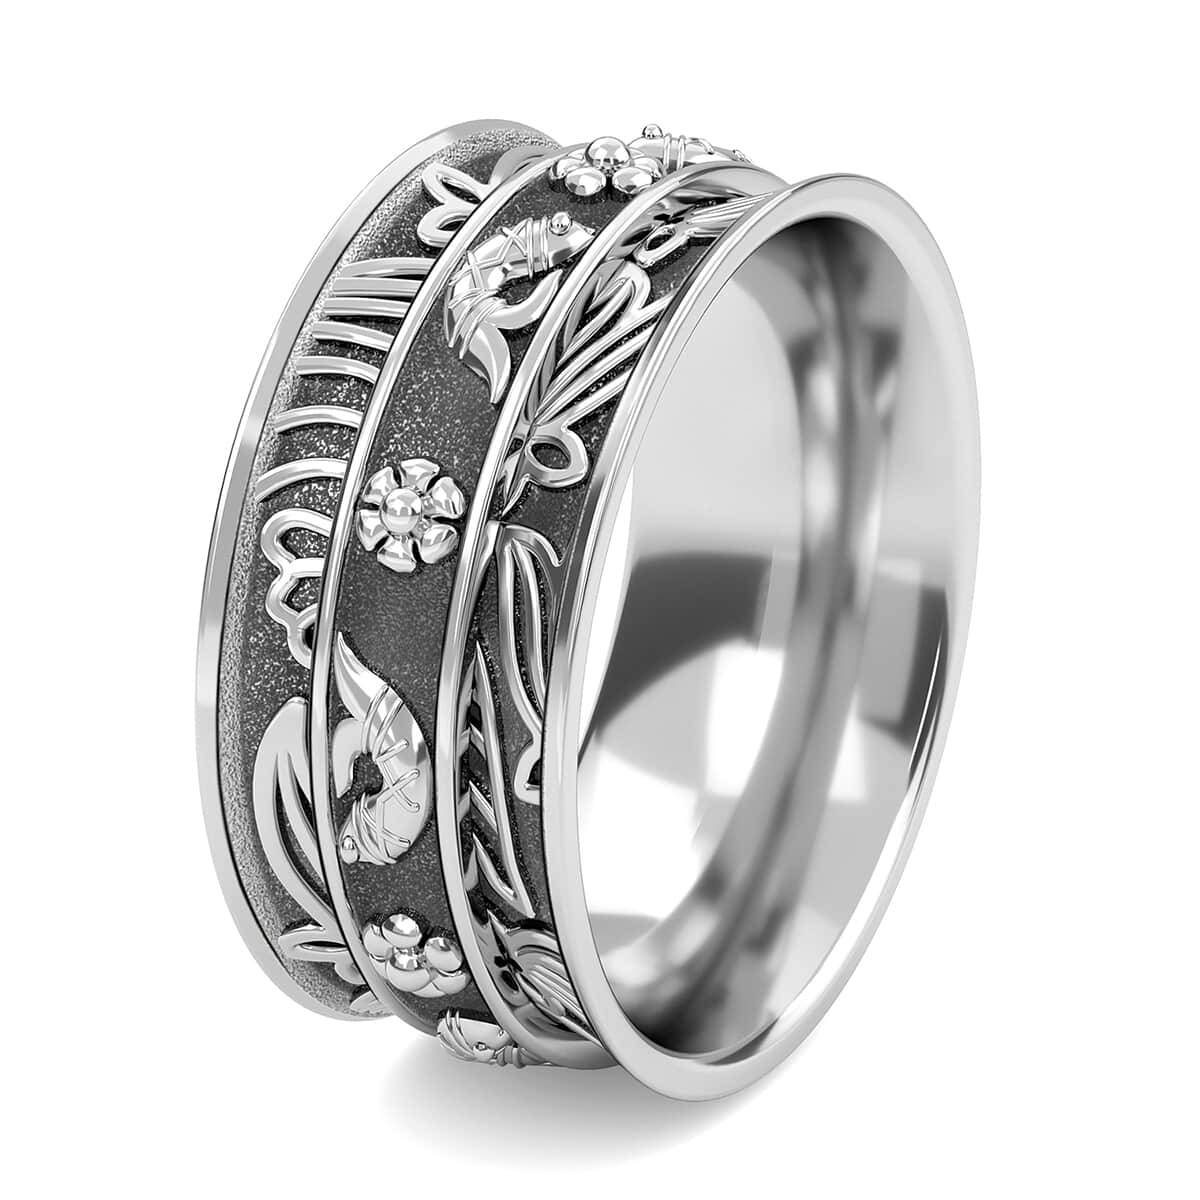 Fish Concave Spinner Ring in Sterling Silver, Anxiety Ring for Women, Fidget Rings for Anxiety, Stress Relieving Anxiety Ring image number 3